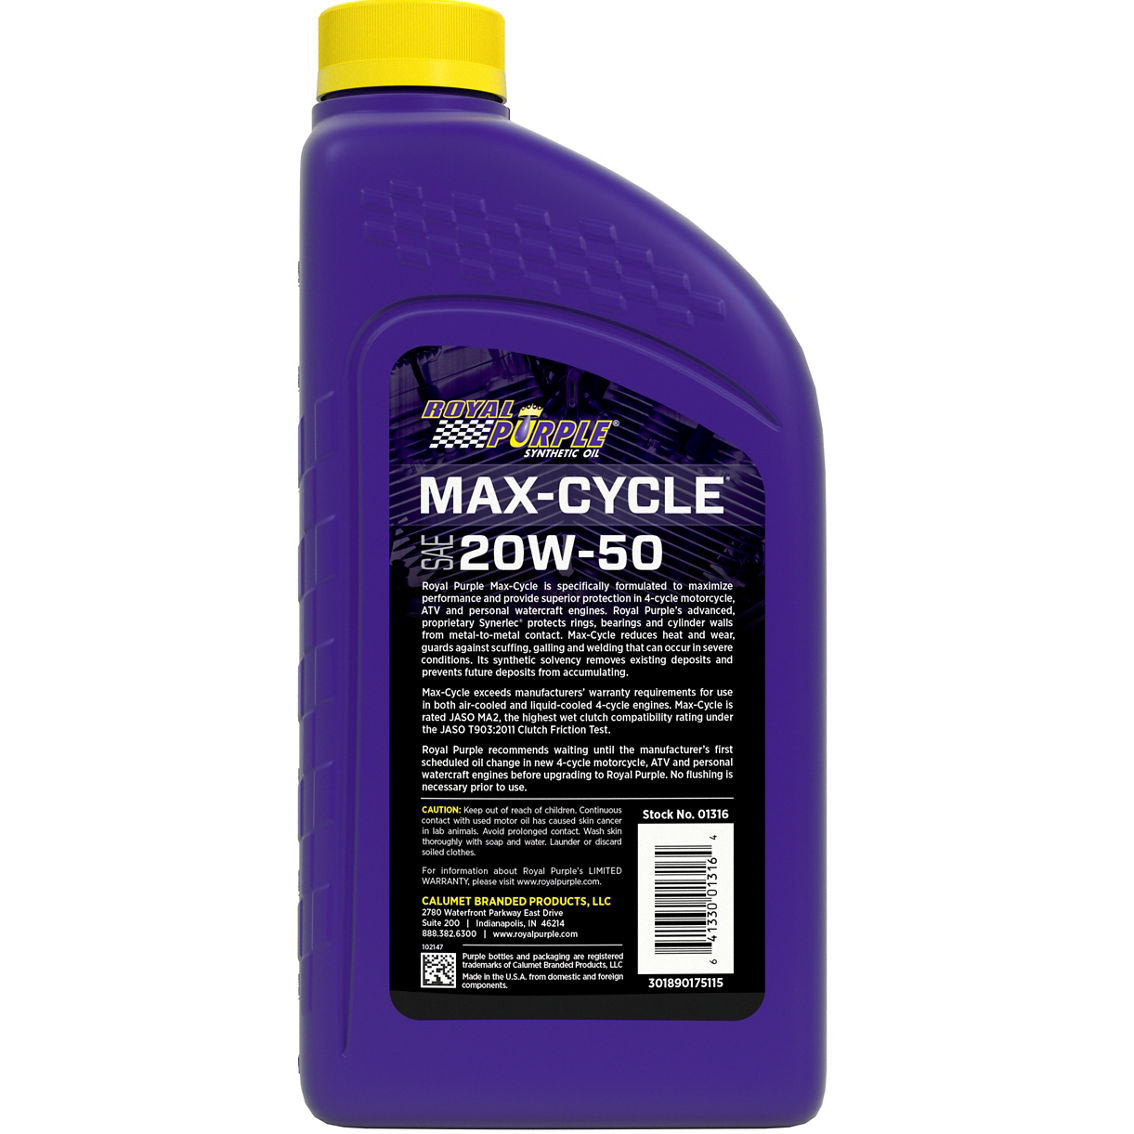 Royal Purple Max-Cycle 20W-50 Synthetic Motor Cycle Oil 1 qt. - Image 2 of 2